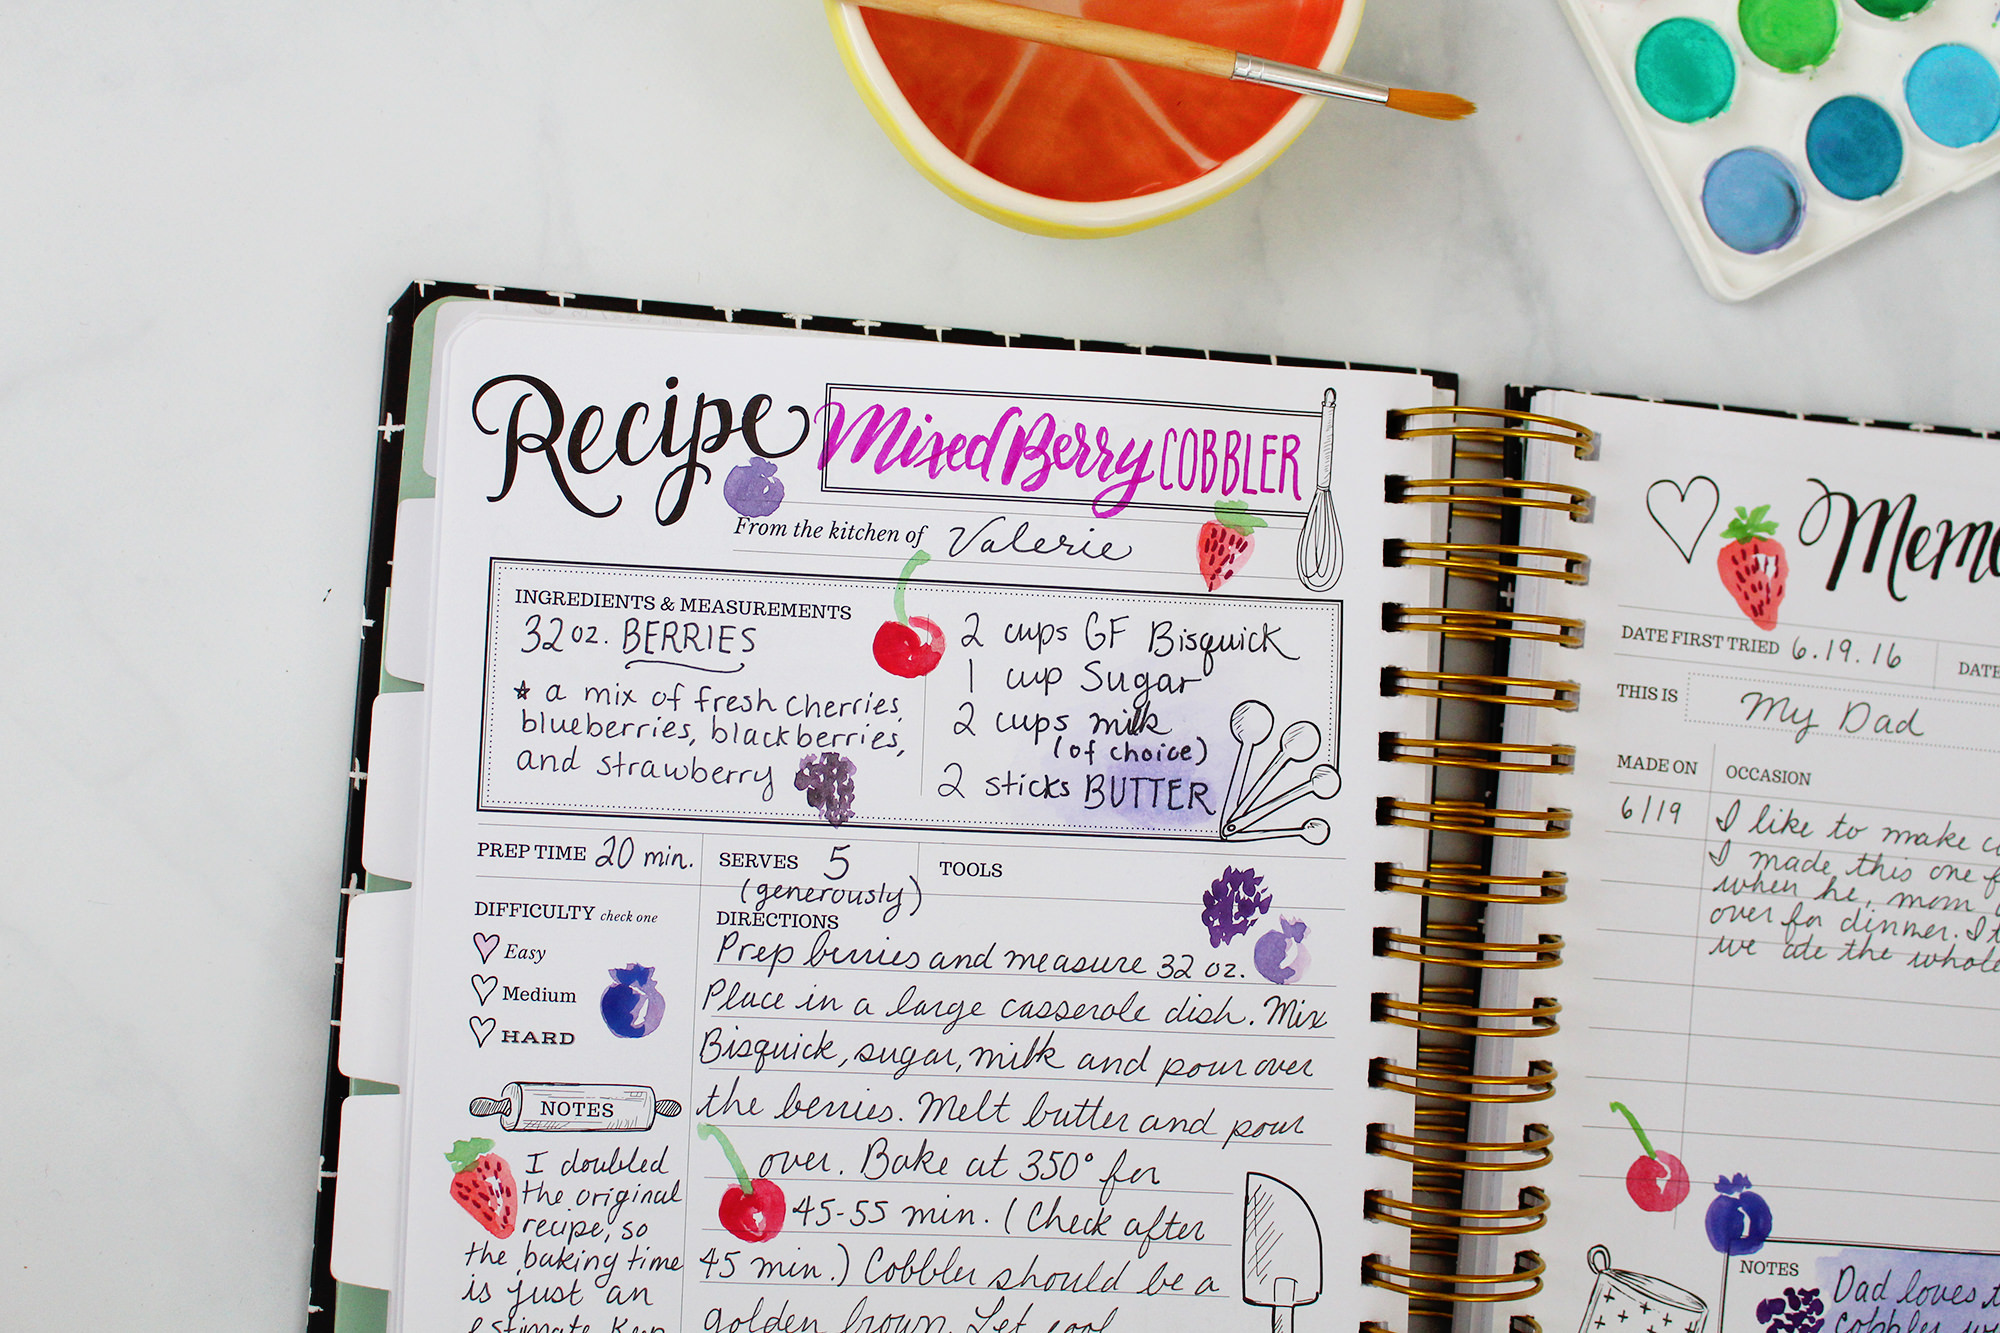 Get creative in your Keepsake Kitchen Diary! Find inspiration at Lily & Val Living!